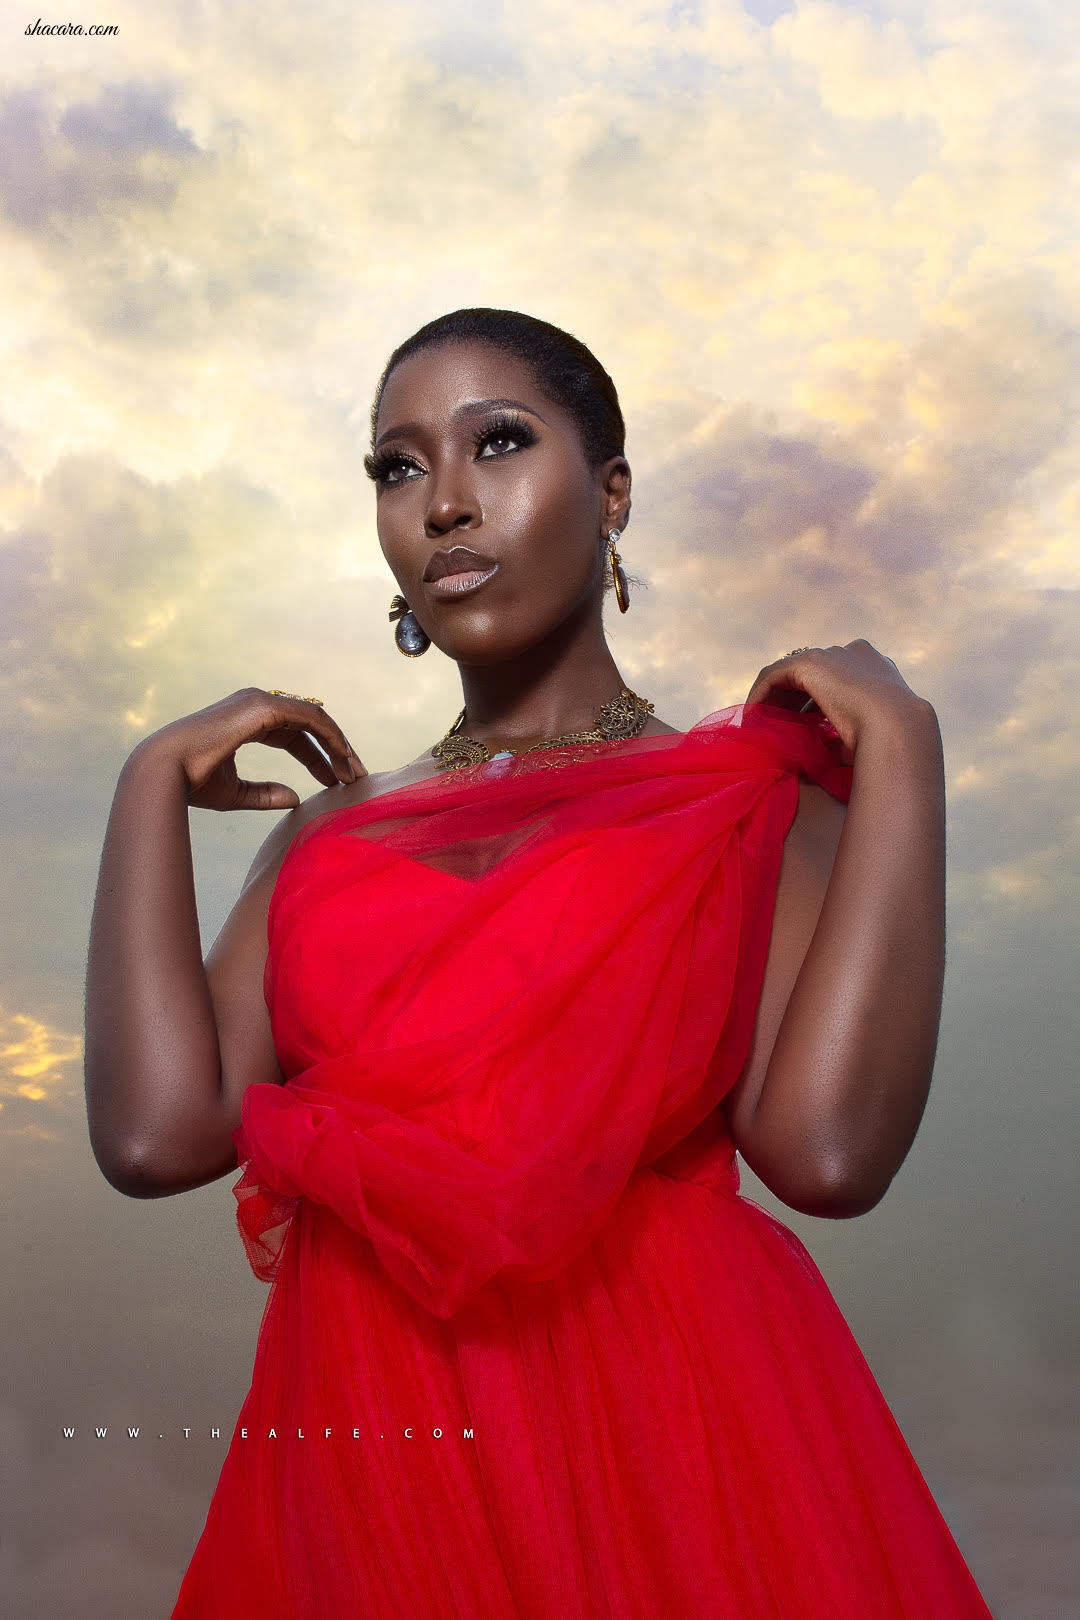 Birthday Behaviour! Vimbai Releases Sultry Photos to Mark Her Special Day